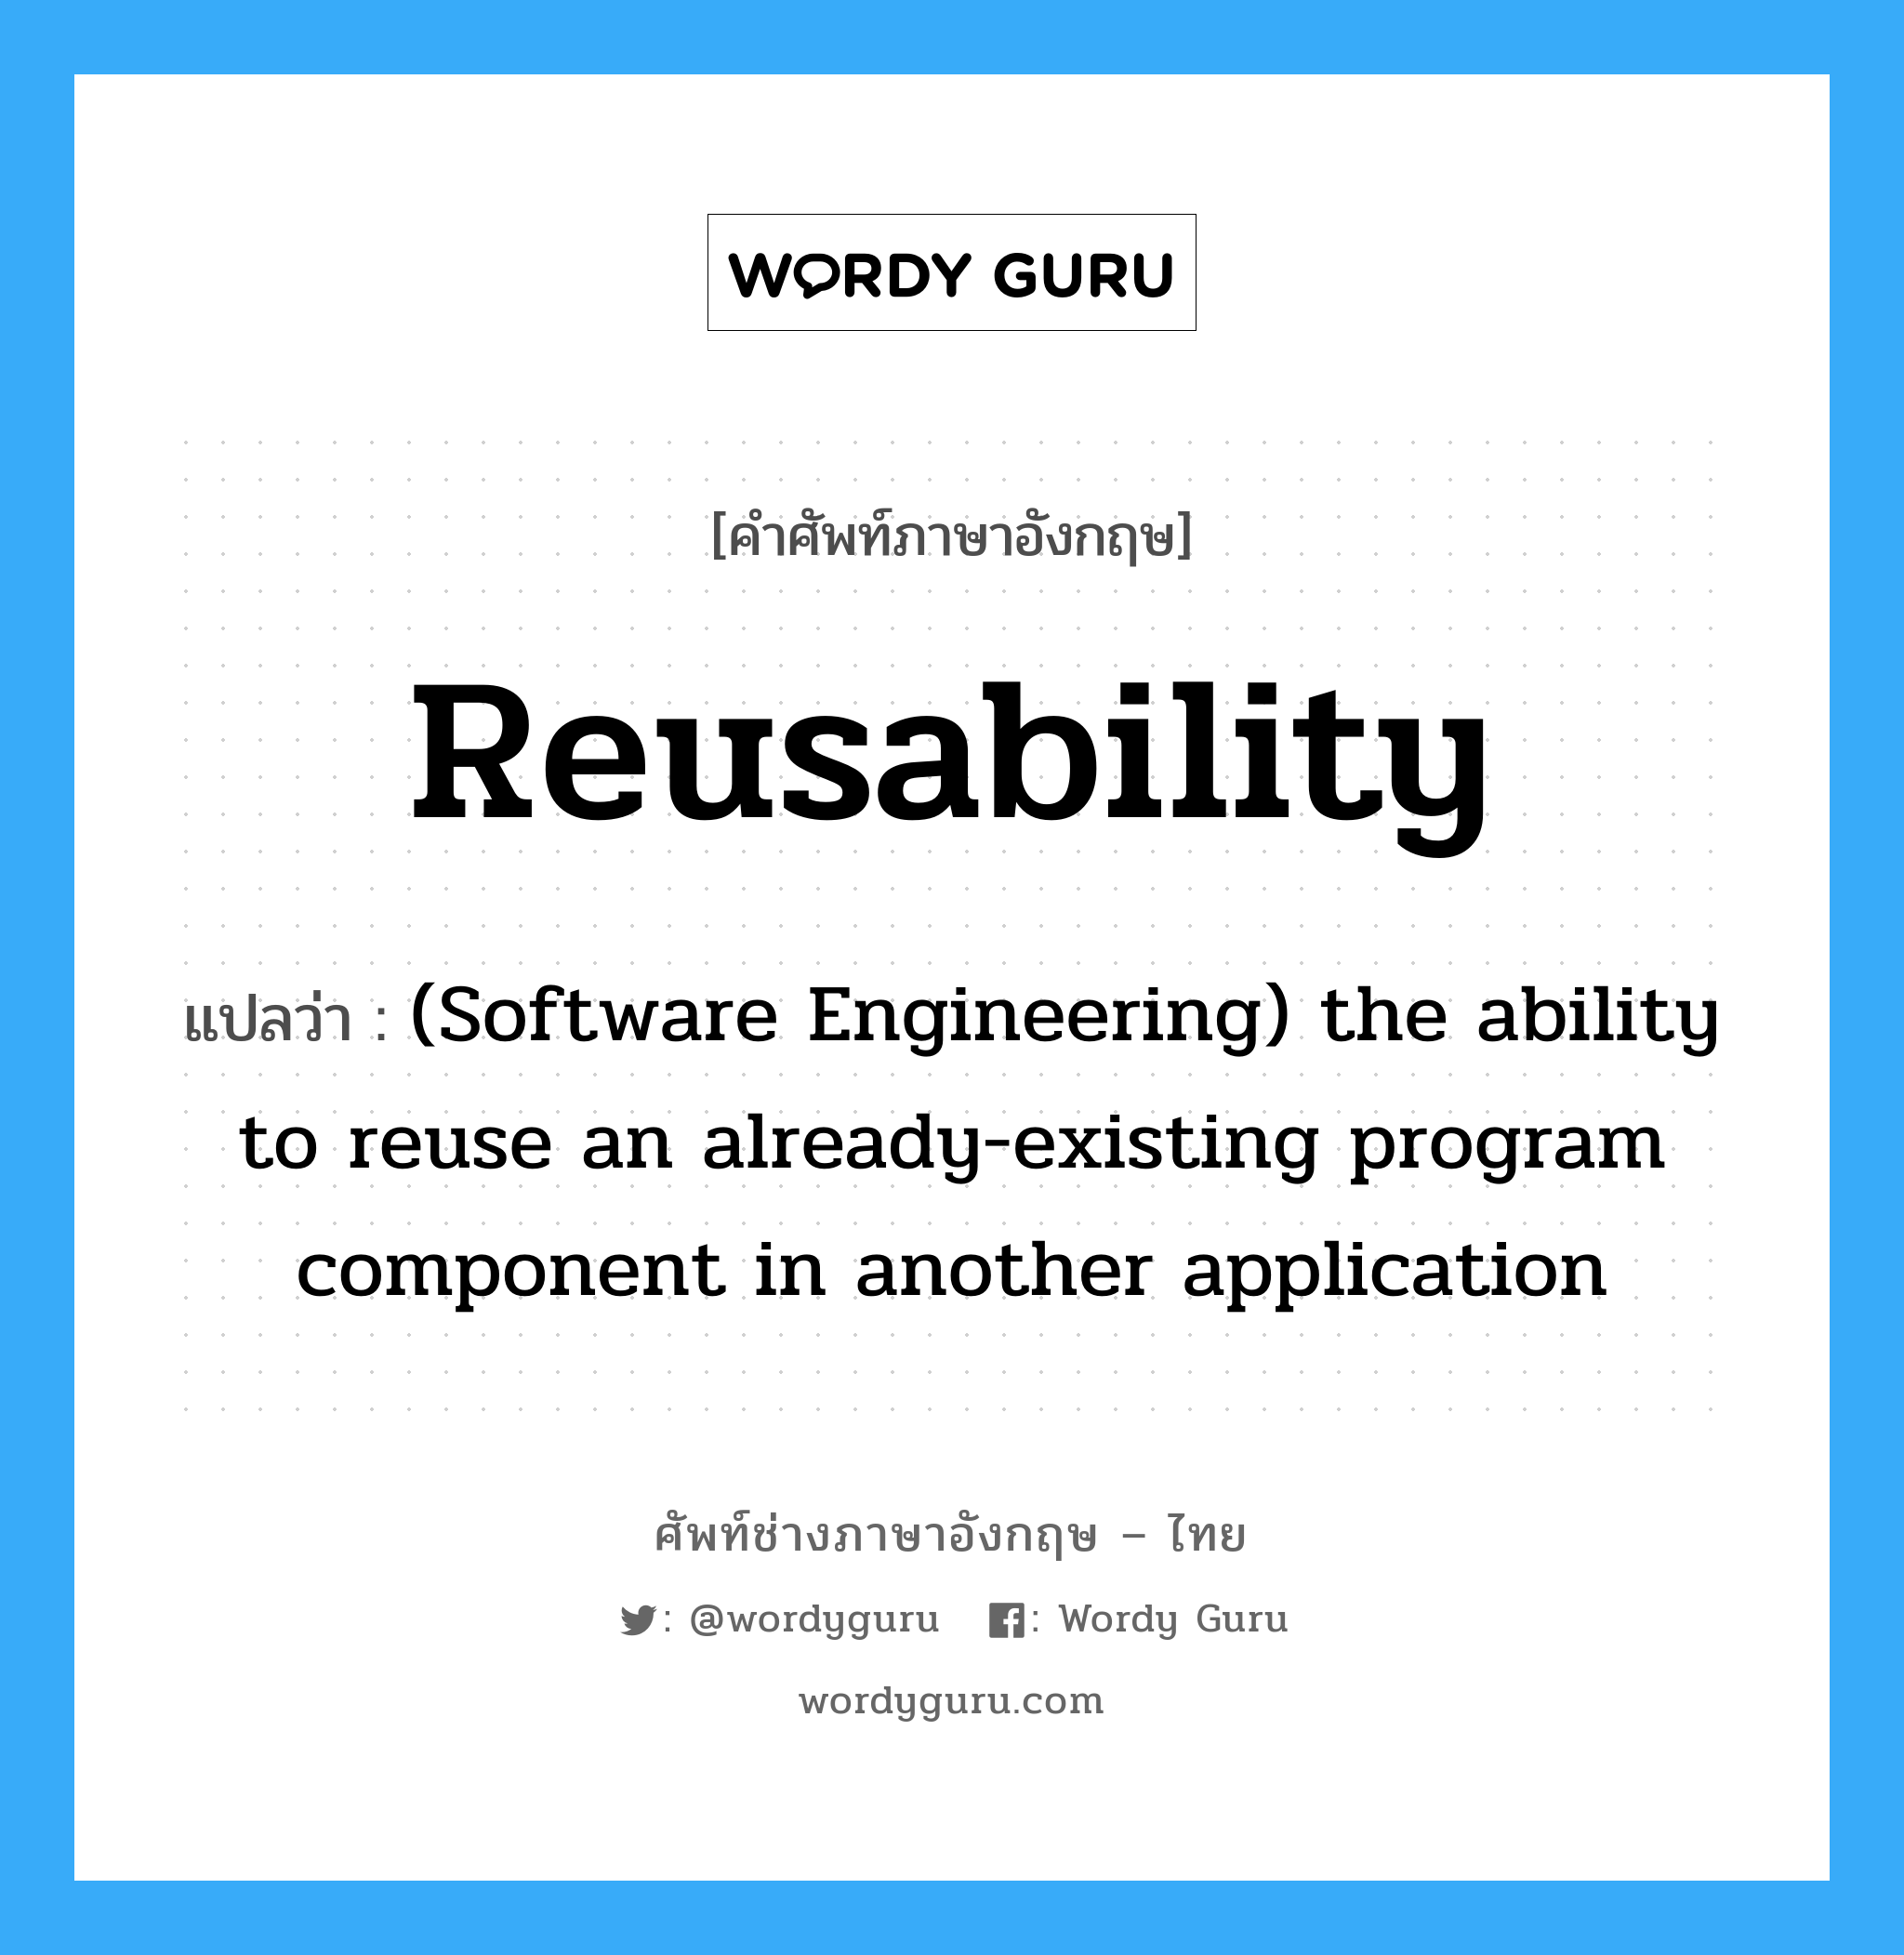 (Software Engineering) the ability to reuse an already-existing program component in another application ภาษาอังกฤษ?, คำศัพท์ช่างภาษาอังกฤษ - ไทย (Software Engineering) the ability to reuse an already-existing program component in another application คำศัพท์ภาษาอังกฤษ (Software Engineering) the ability to reuse an already-existing program component in another application แปลว่า Reusability